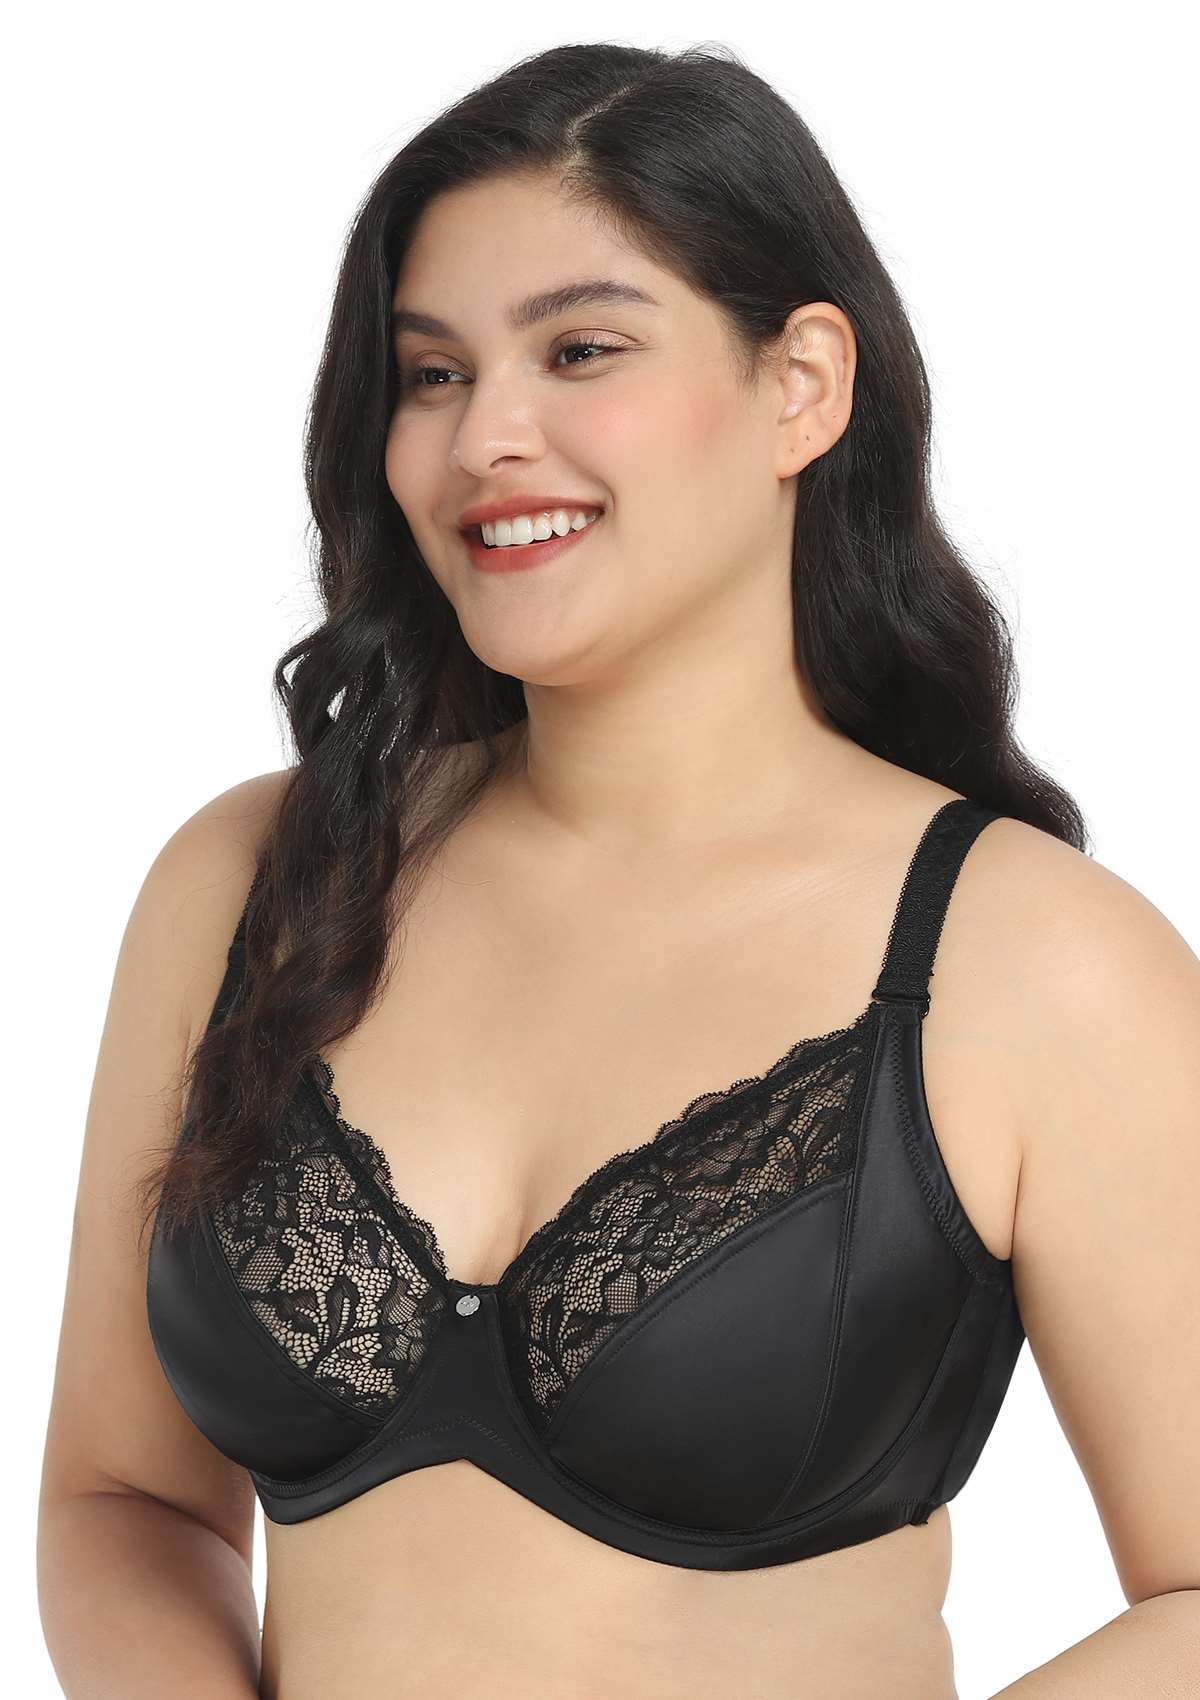 HSIA Foxy Satin Silky Full Coverage Underwire Bra With Floral Lace Trim - Black / 40 / D